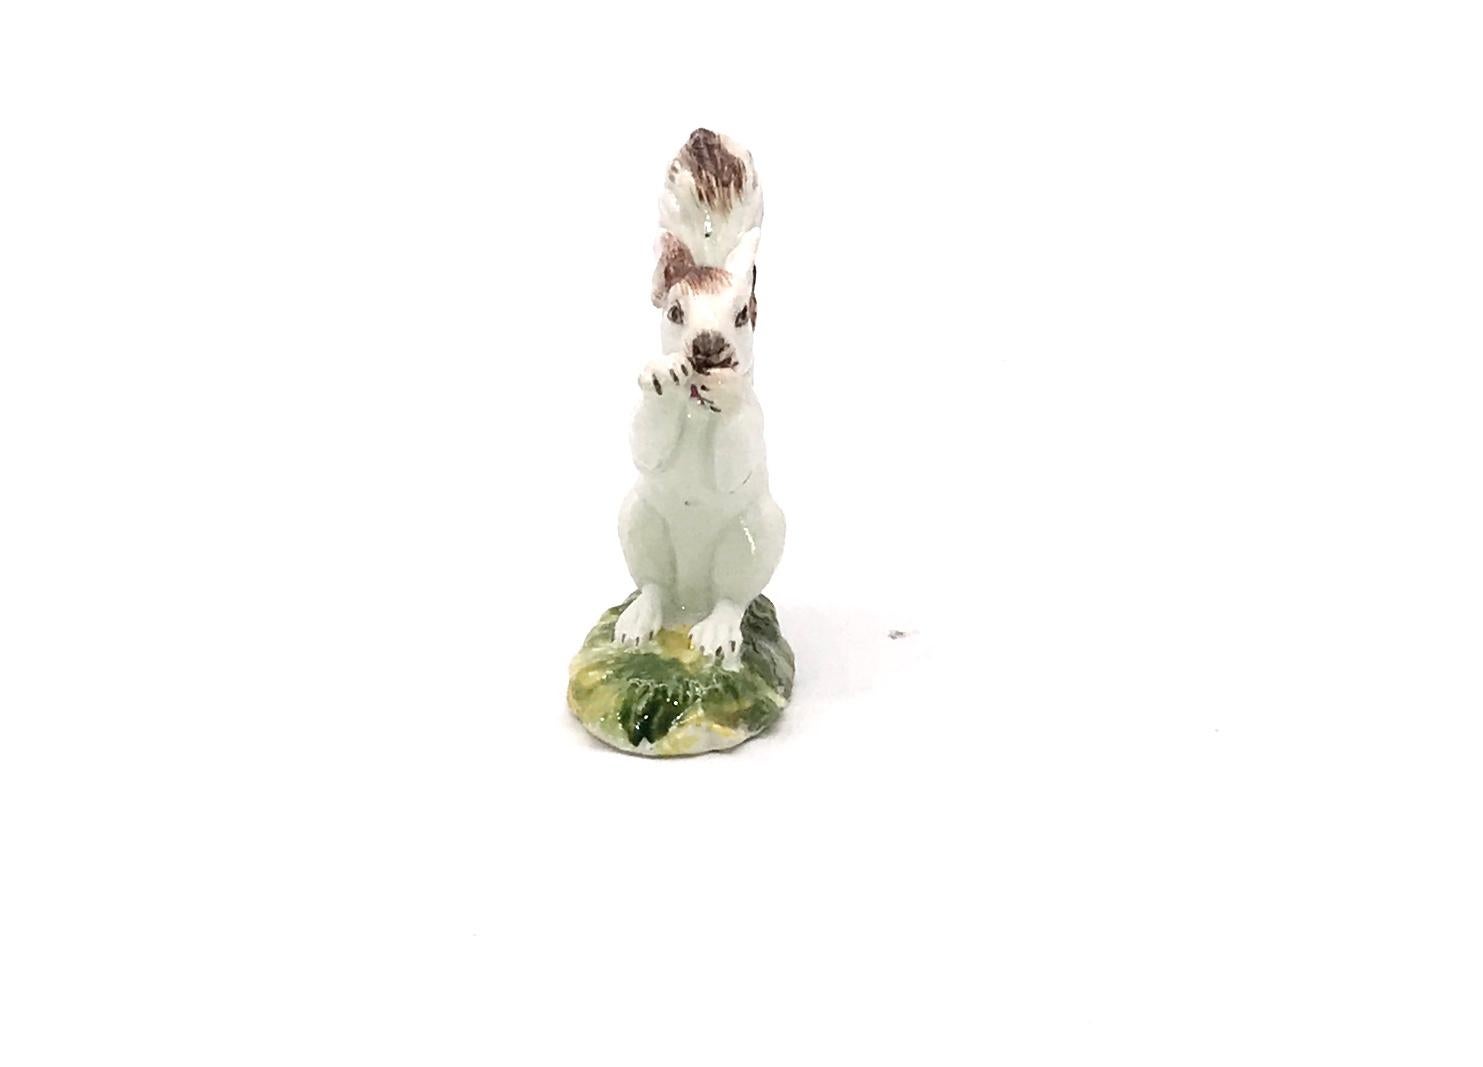 Rare Antique white squirrel with brown accents, clasping a nut between its paws and perched on a green base, 2.5 high by 1.5 inches wide, made by the Derby factory in the eighteenth century. This is the smaller of 2 different sizes of squirrels